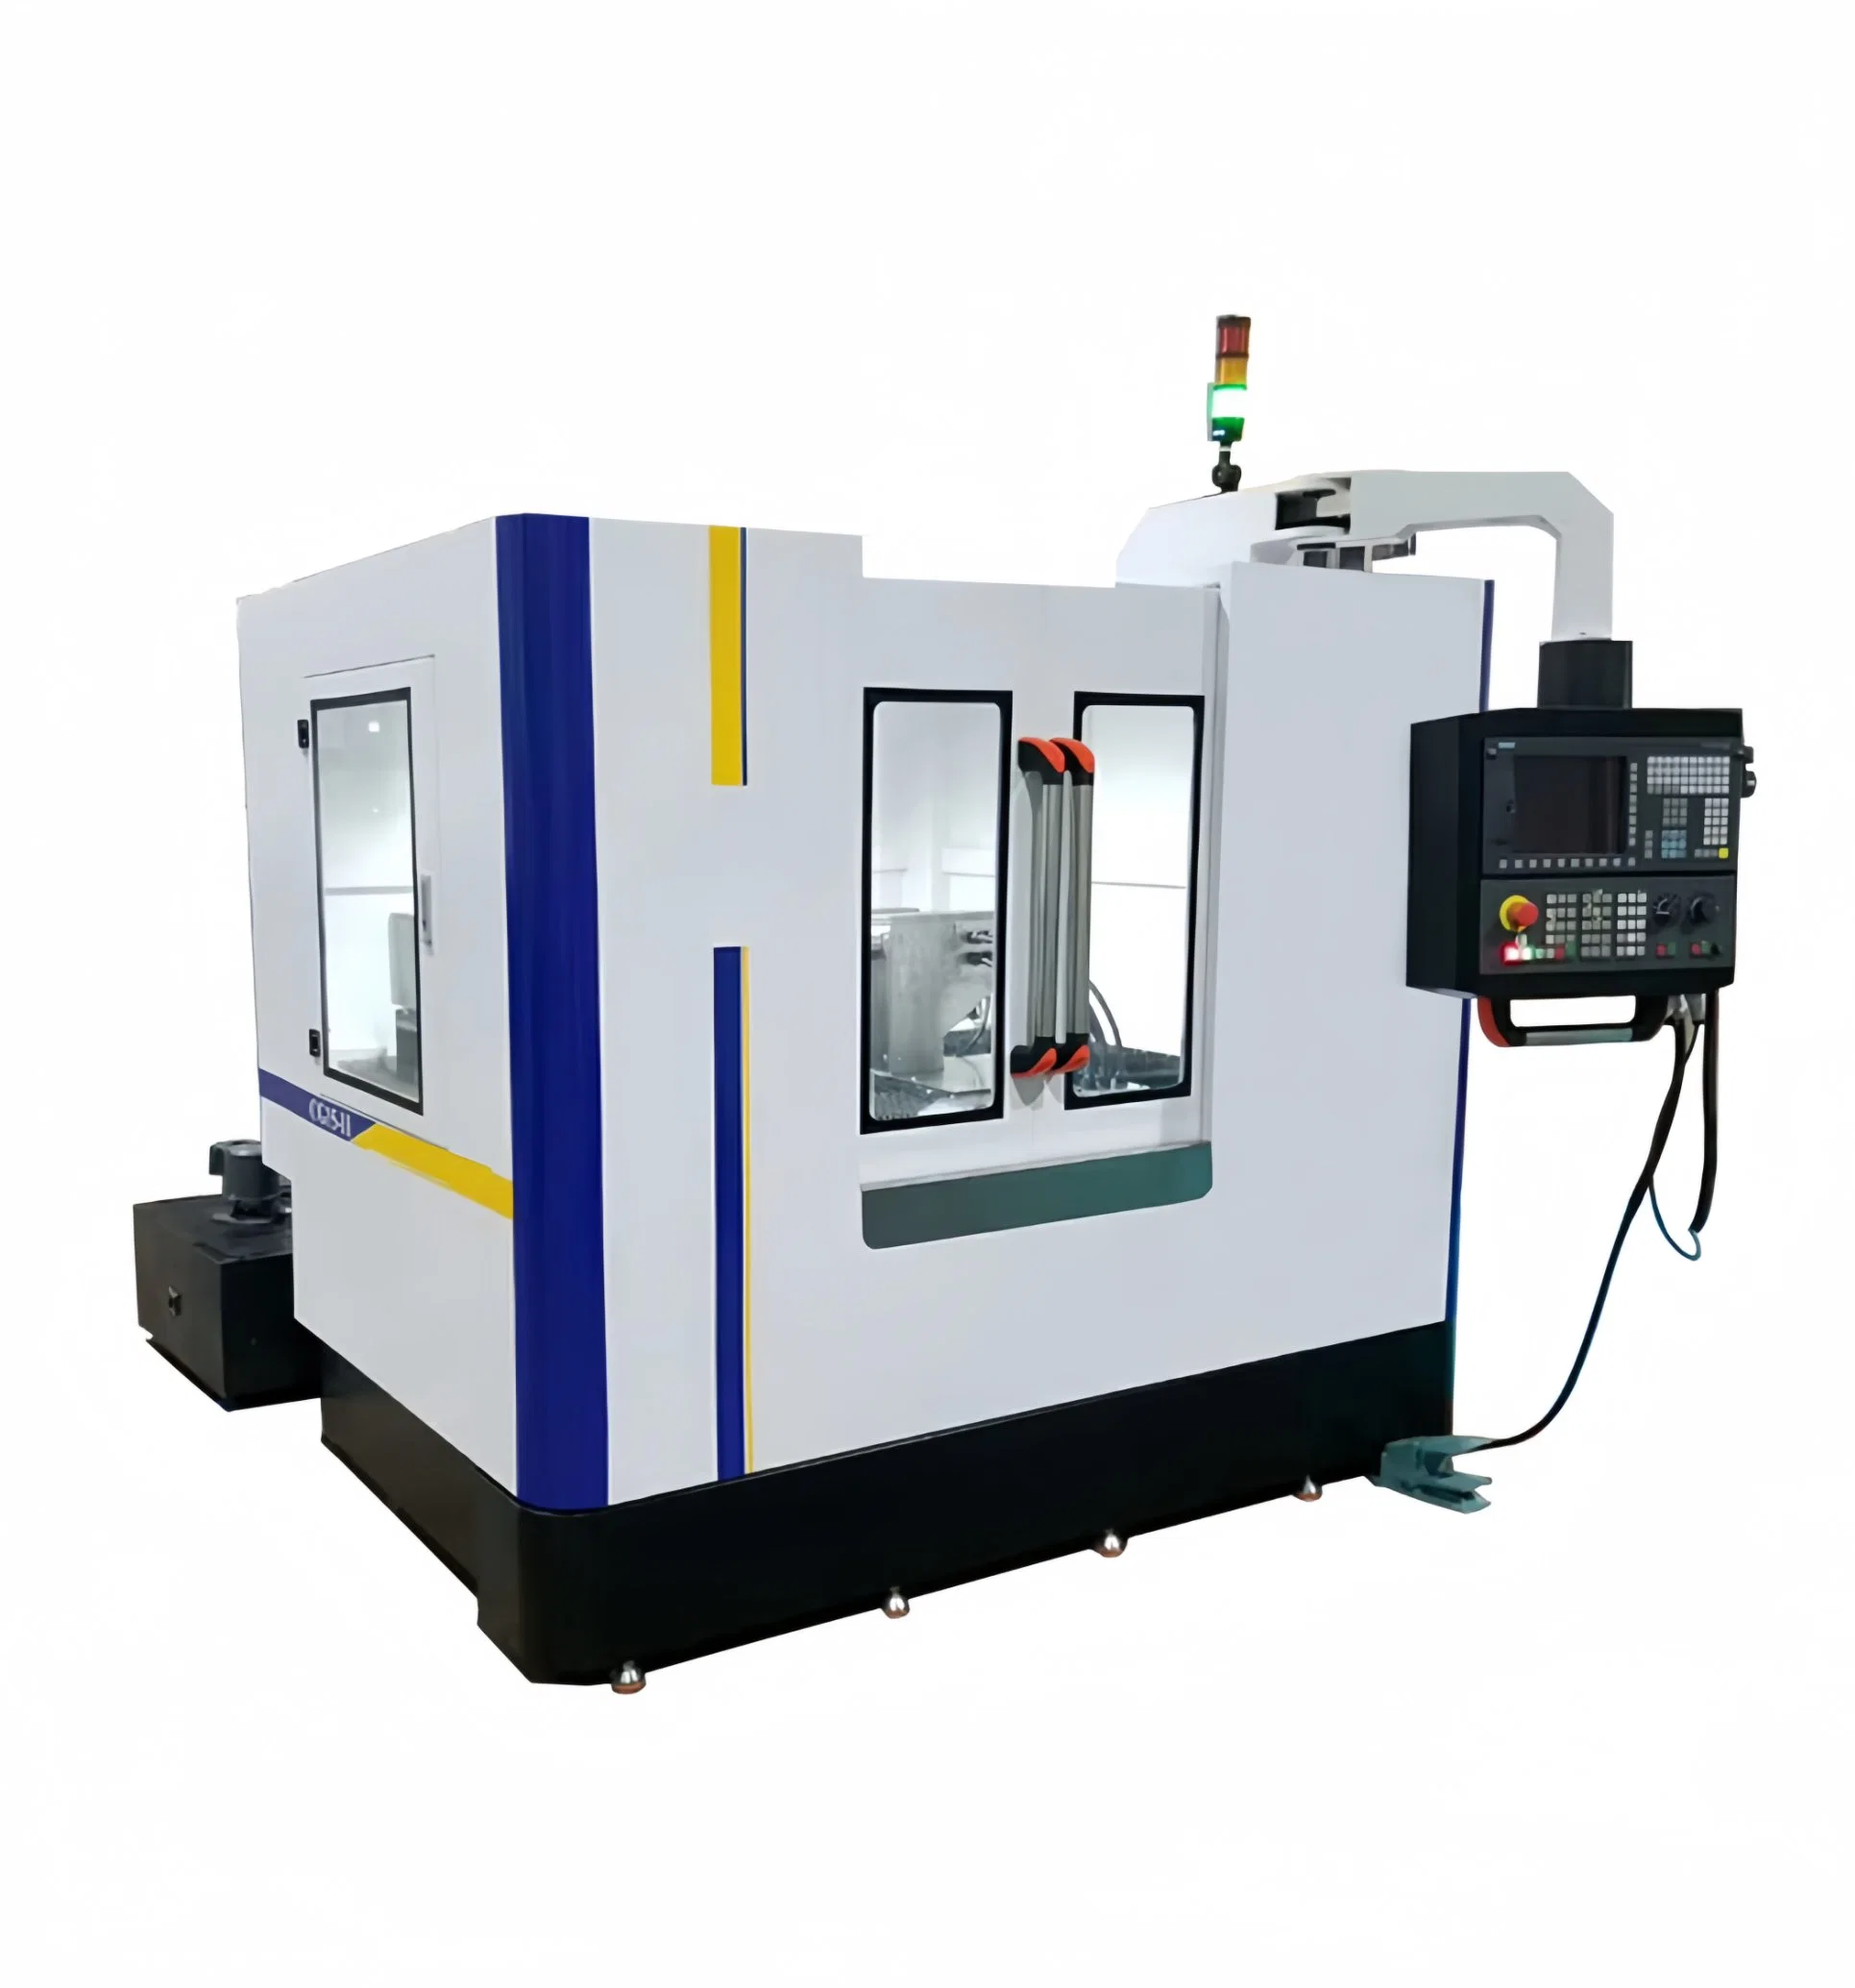 High Speed Cg15 CNC Universal Composite Grinding Machine for Internal External Cylindrical Face Crank Shaft Honing Grinder Used on Metal Grinding Dia: 200mm